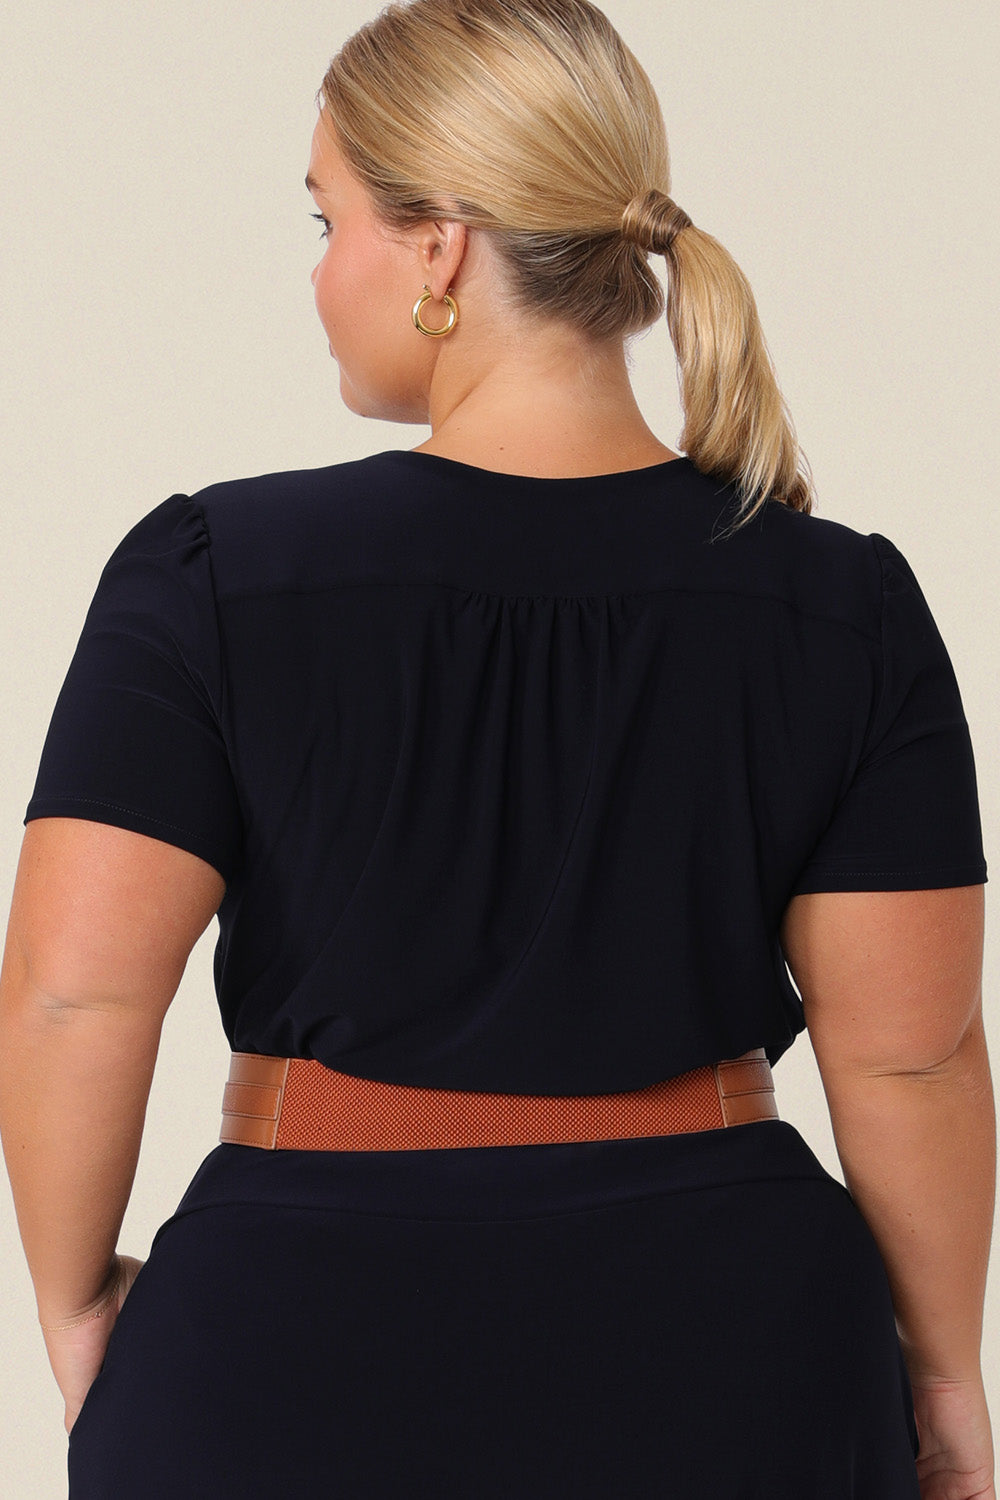 Back view of a petite woman with curve wears a navy blue V-neck top with short sleeves. A good work top for plus size women, this tailored top is made in Australia by Australian fashion brand, Leina & Fleur in sizes 8 to 24.